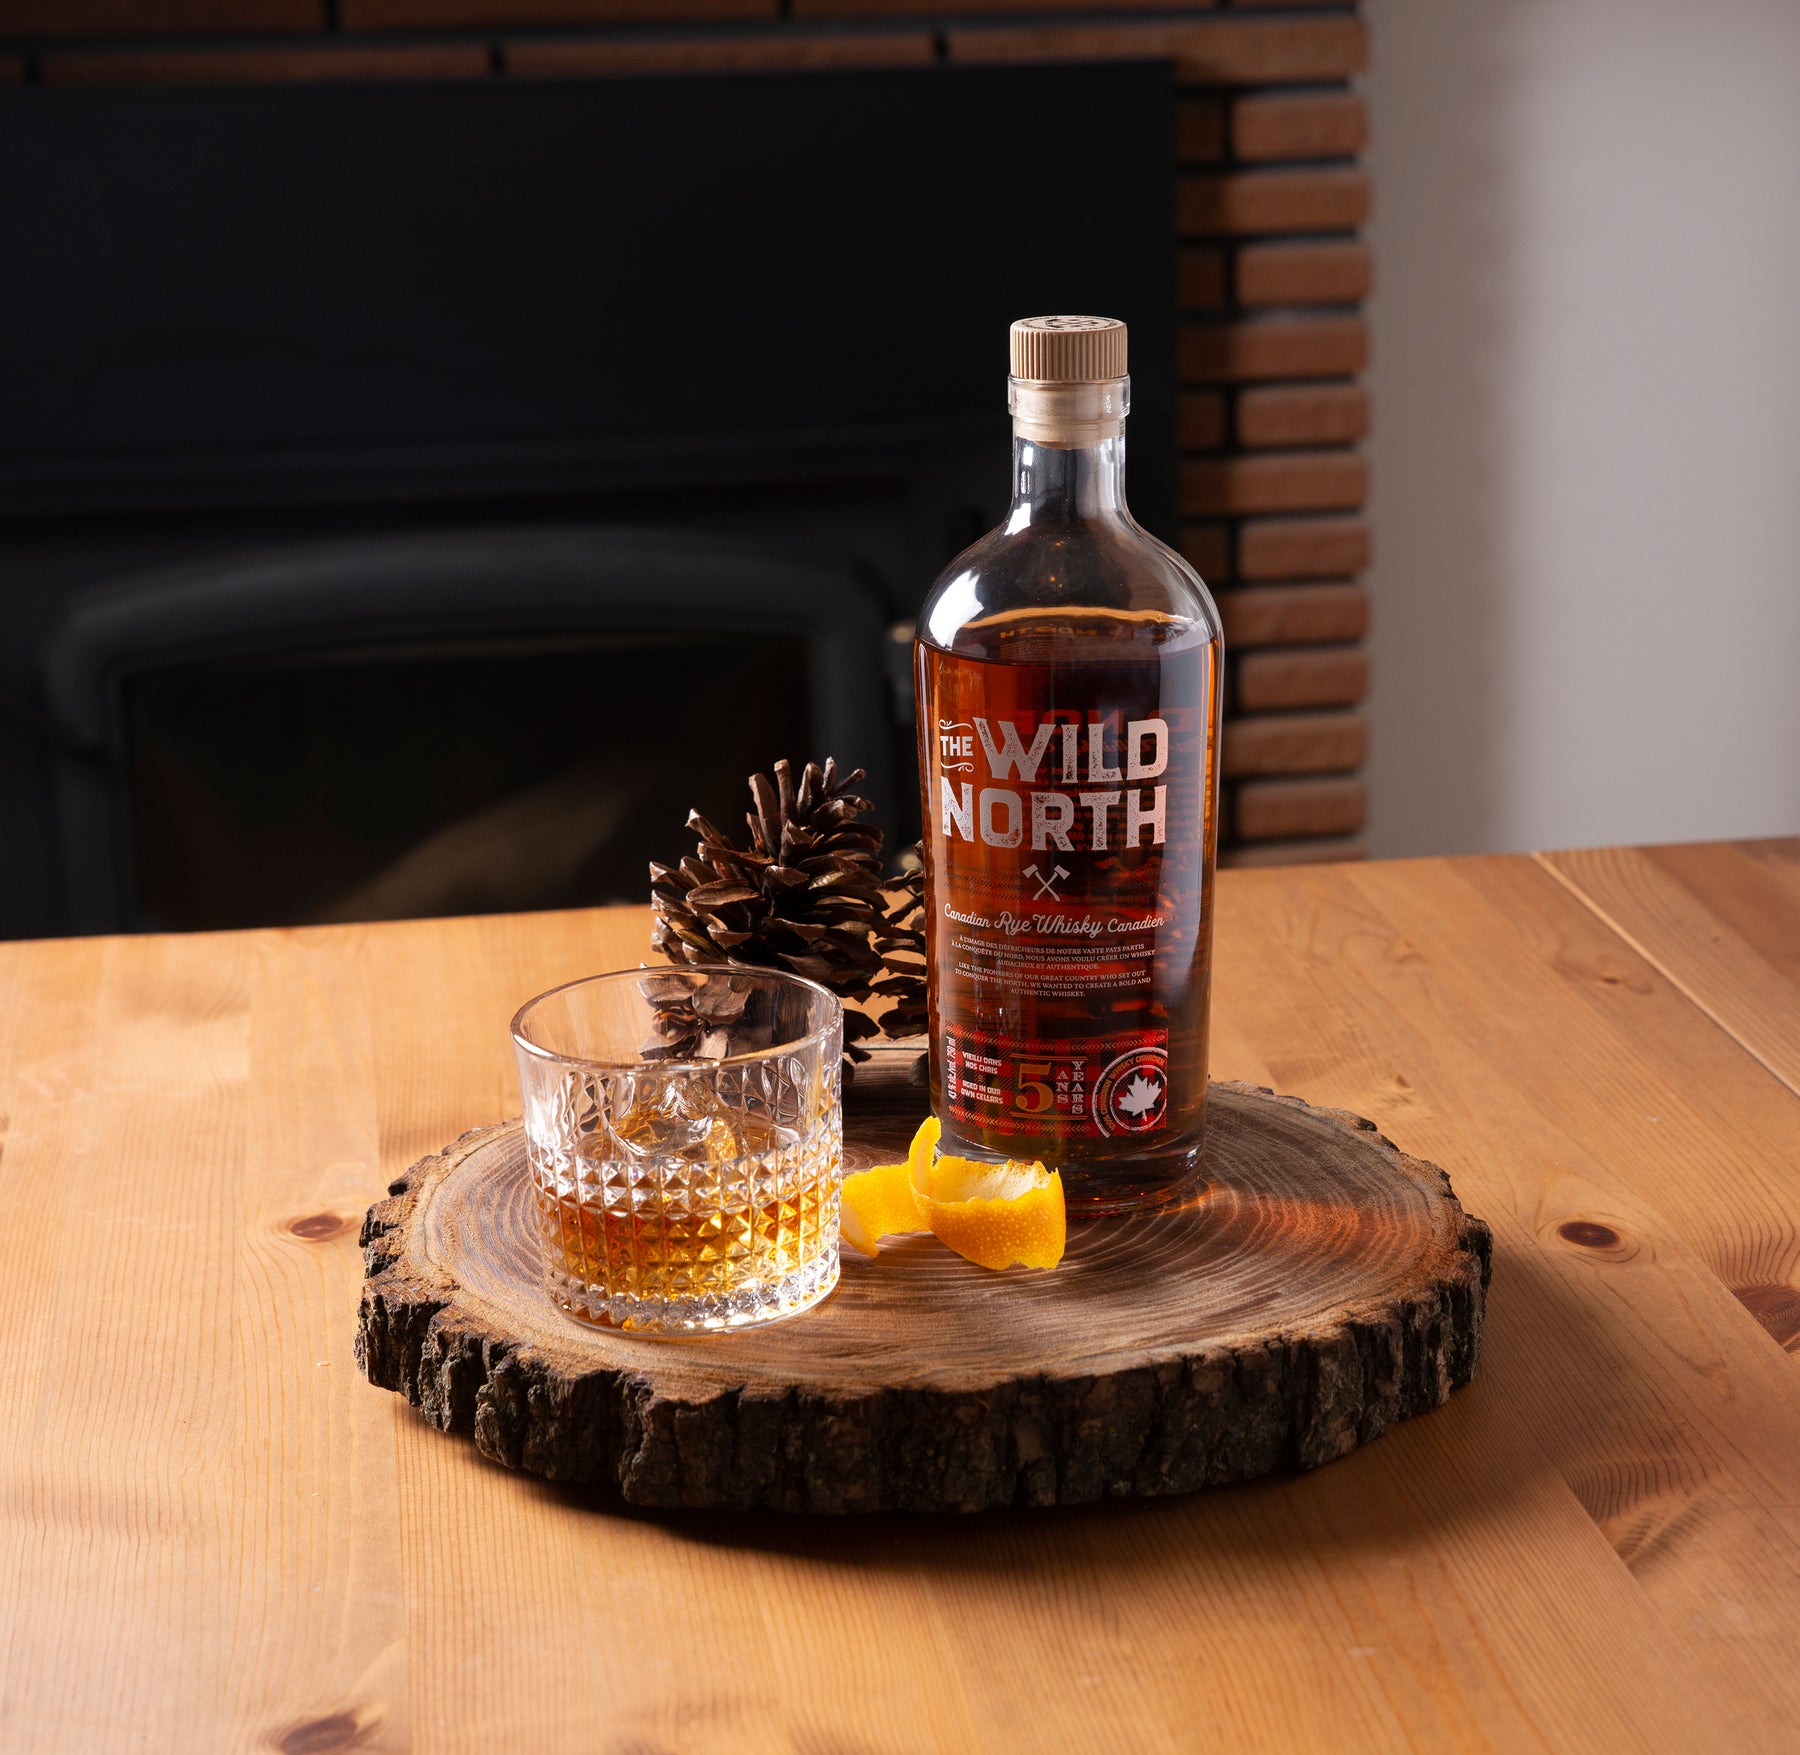 A photo of sortilege whisky on a wooden plate, with a glass of whisky. The whiskey is on a table with a fireplace in the background